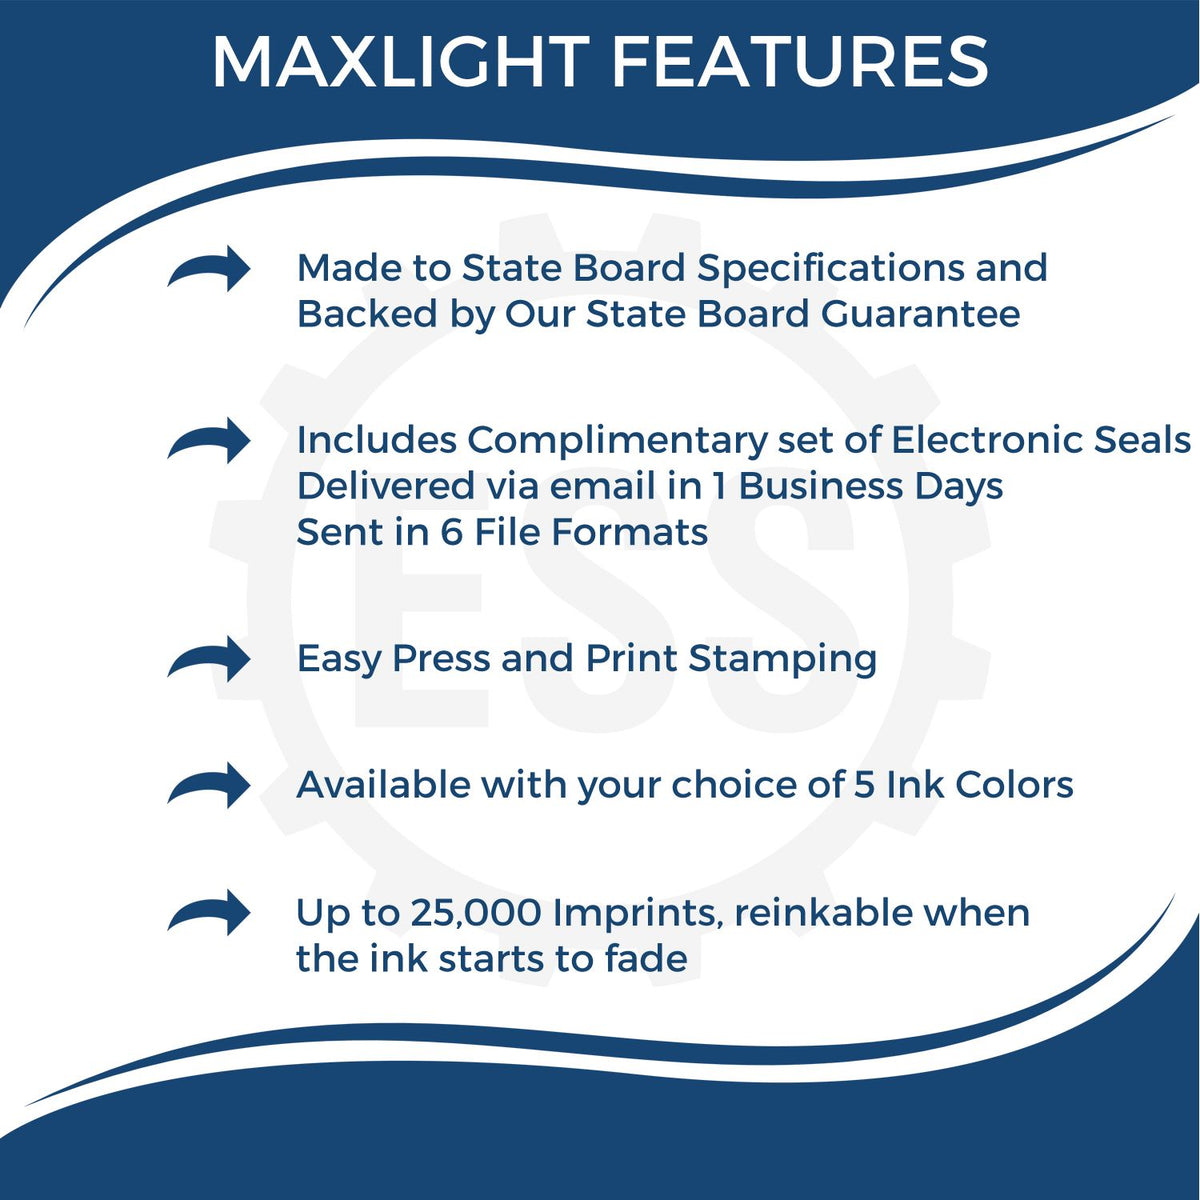 A picture of an infographic highlighting the selling points for the Premium MaxLight Pre-Inked Iowa Engineering Stamp